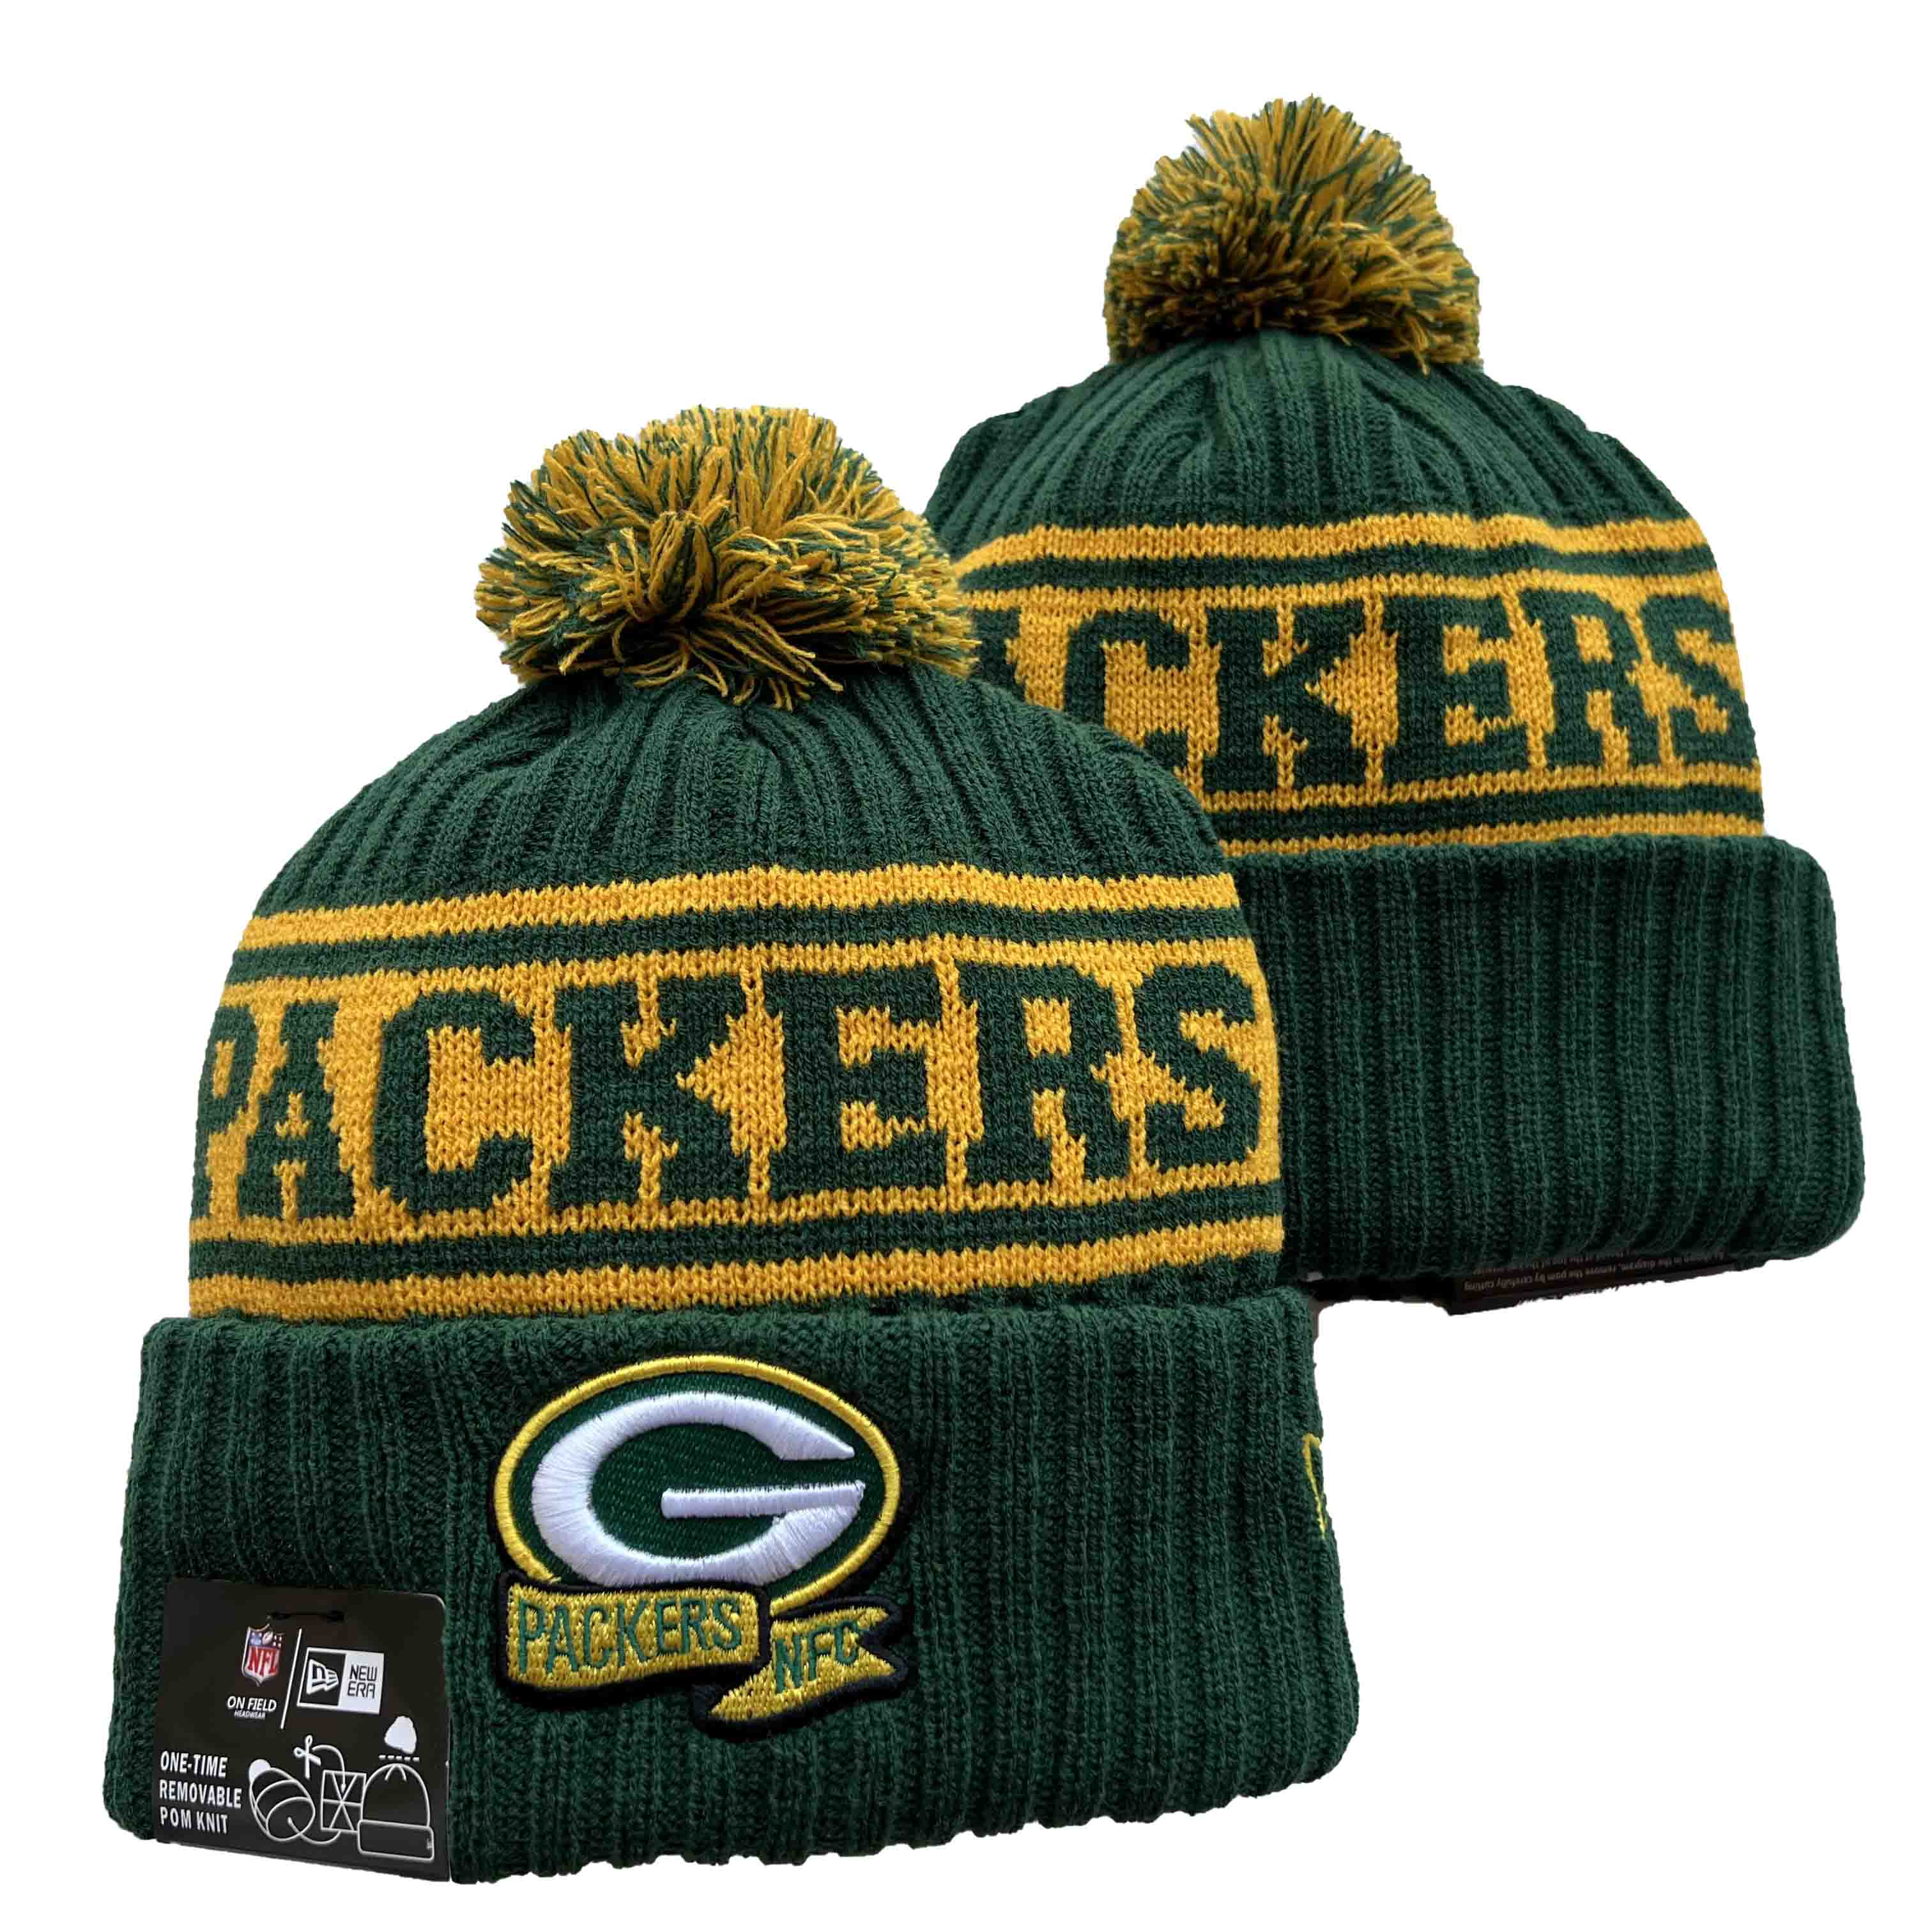 NFL Green Bay Packers Beanies Knit Hats-YD1178